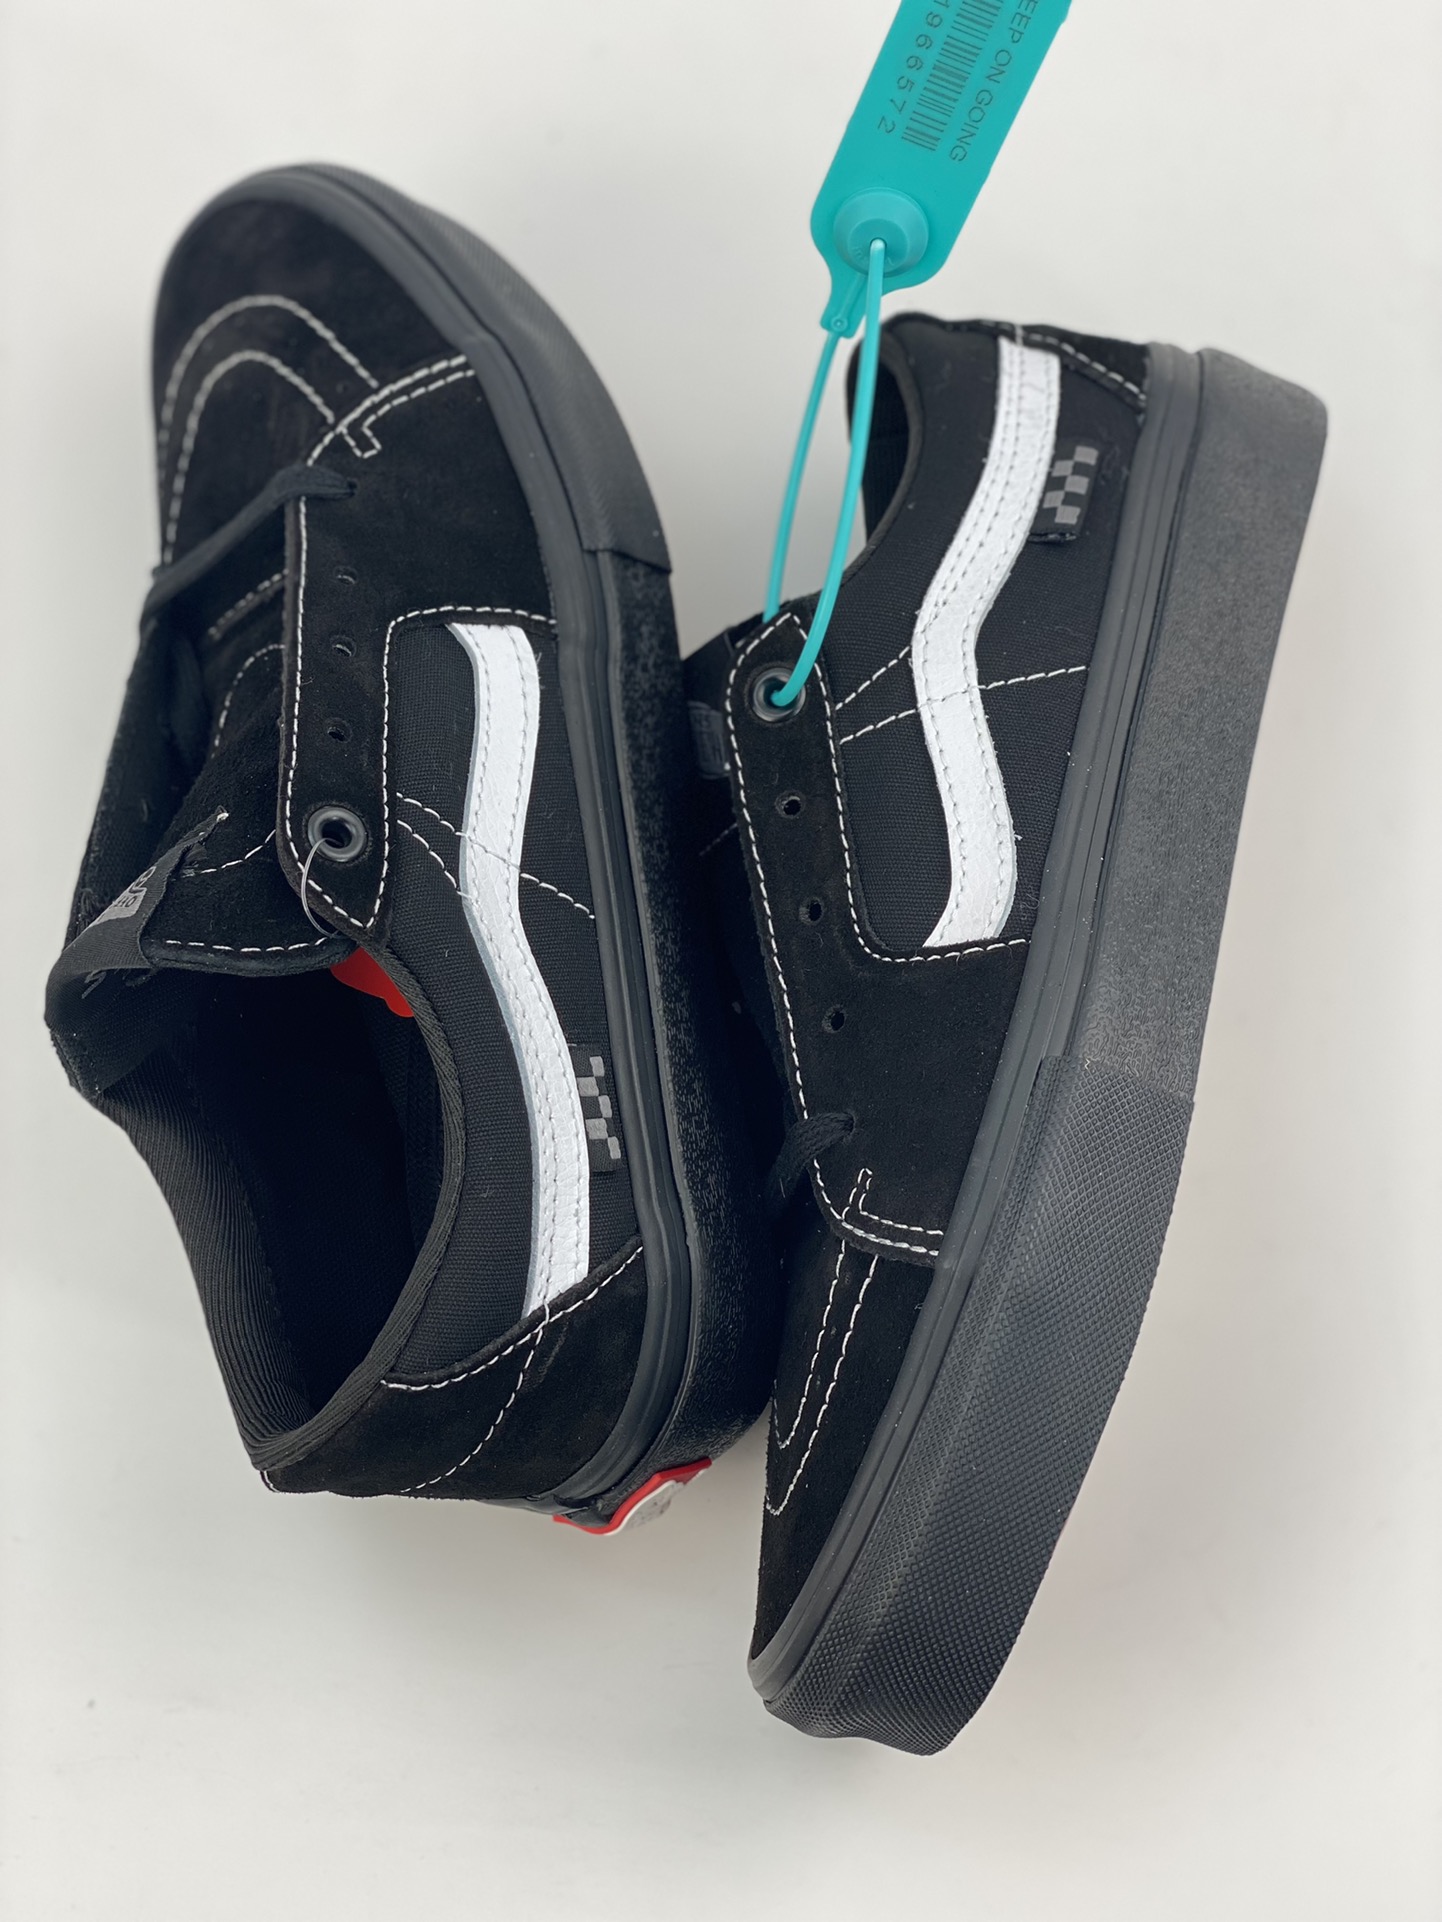 VANS MN SK8-LOW PRO Skate black classic suede side logo checkerboard sports casual shoes skateboard shoes